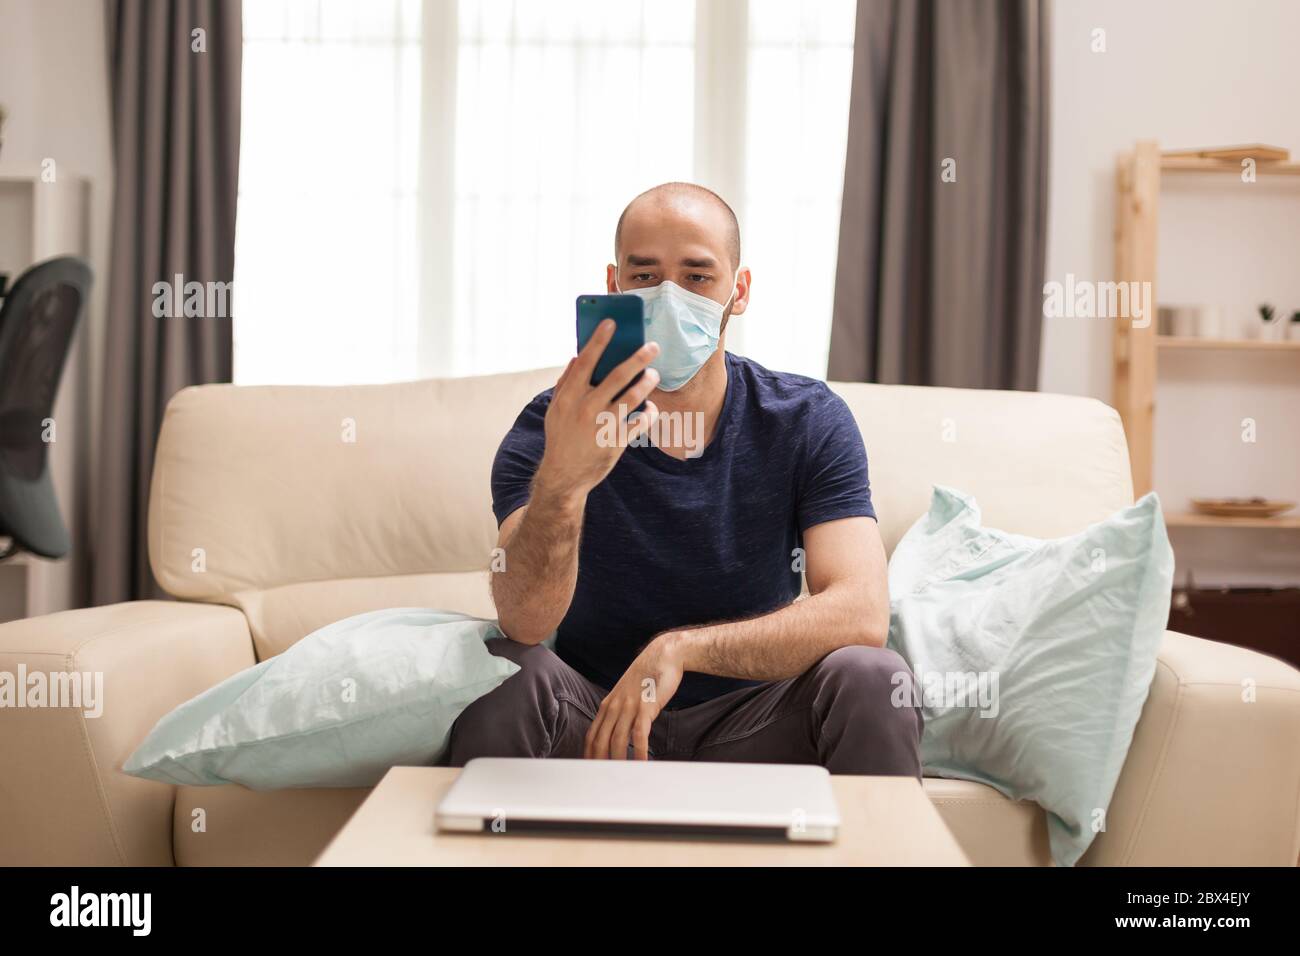 Man watching a video on smartphone wearing protection man while sitting on sofa during quarantine. Stock Photo